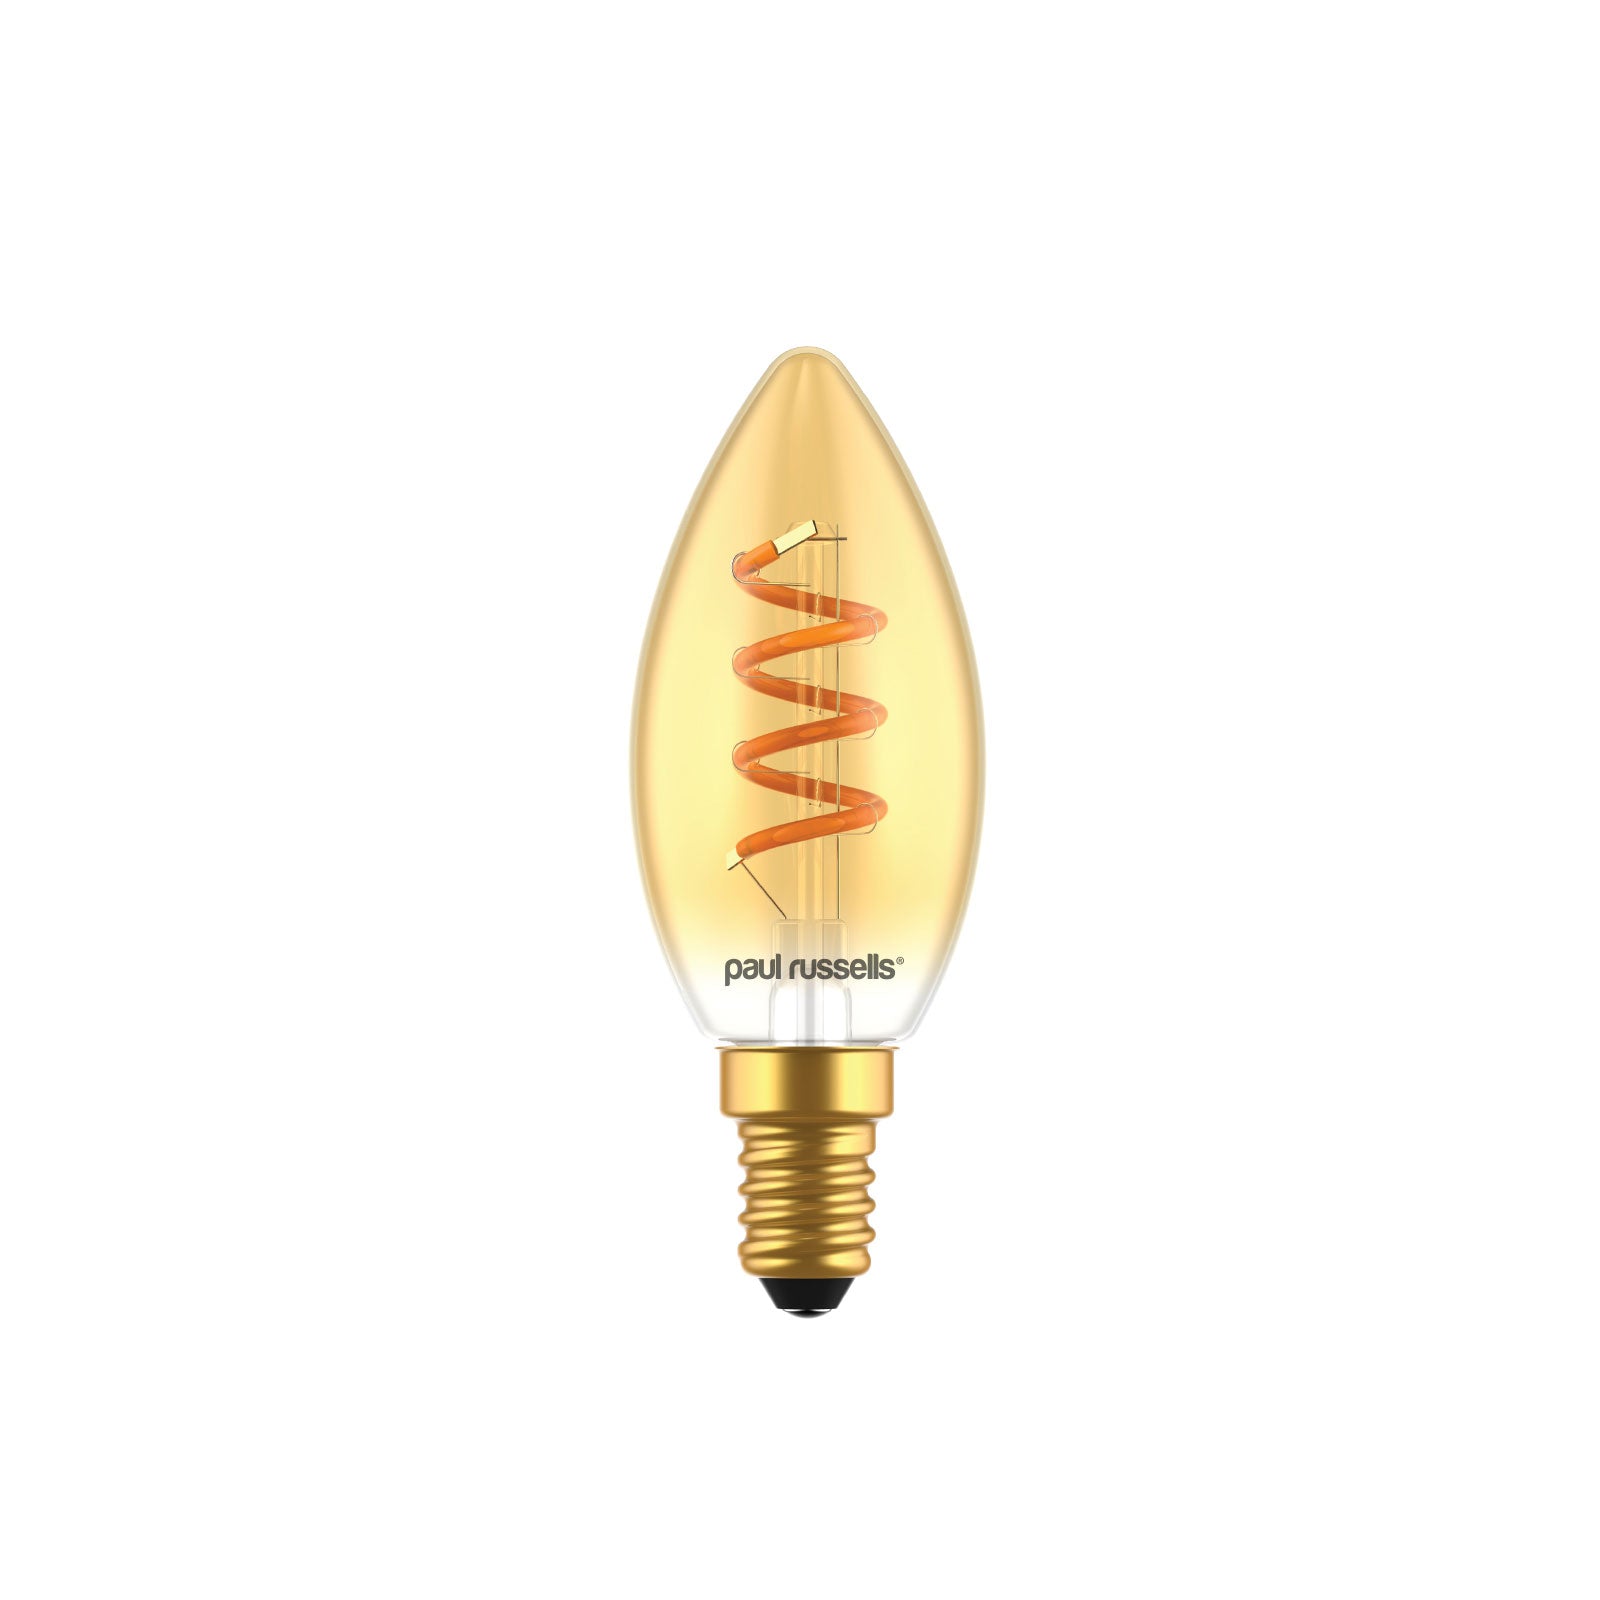 LED Spiral Antique Candle Amber Bulbs 15W, SES/E14, 135 Lumens, Extra Warm White (1800K), 240V